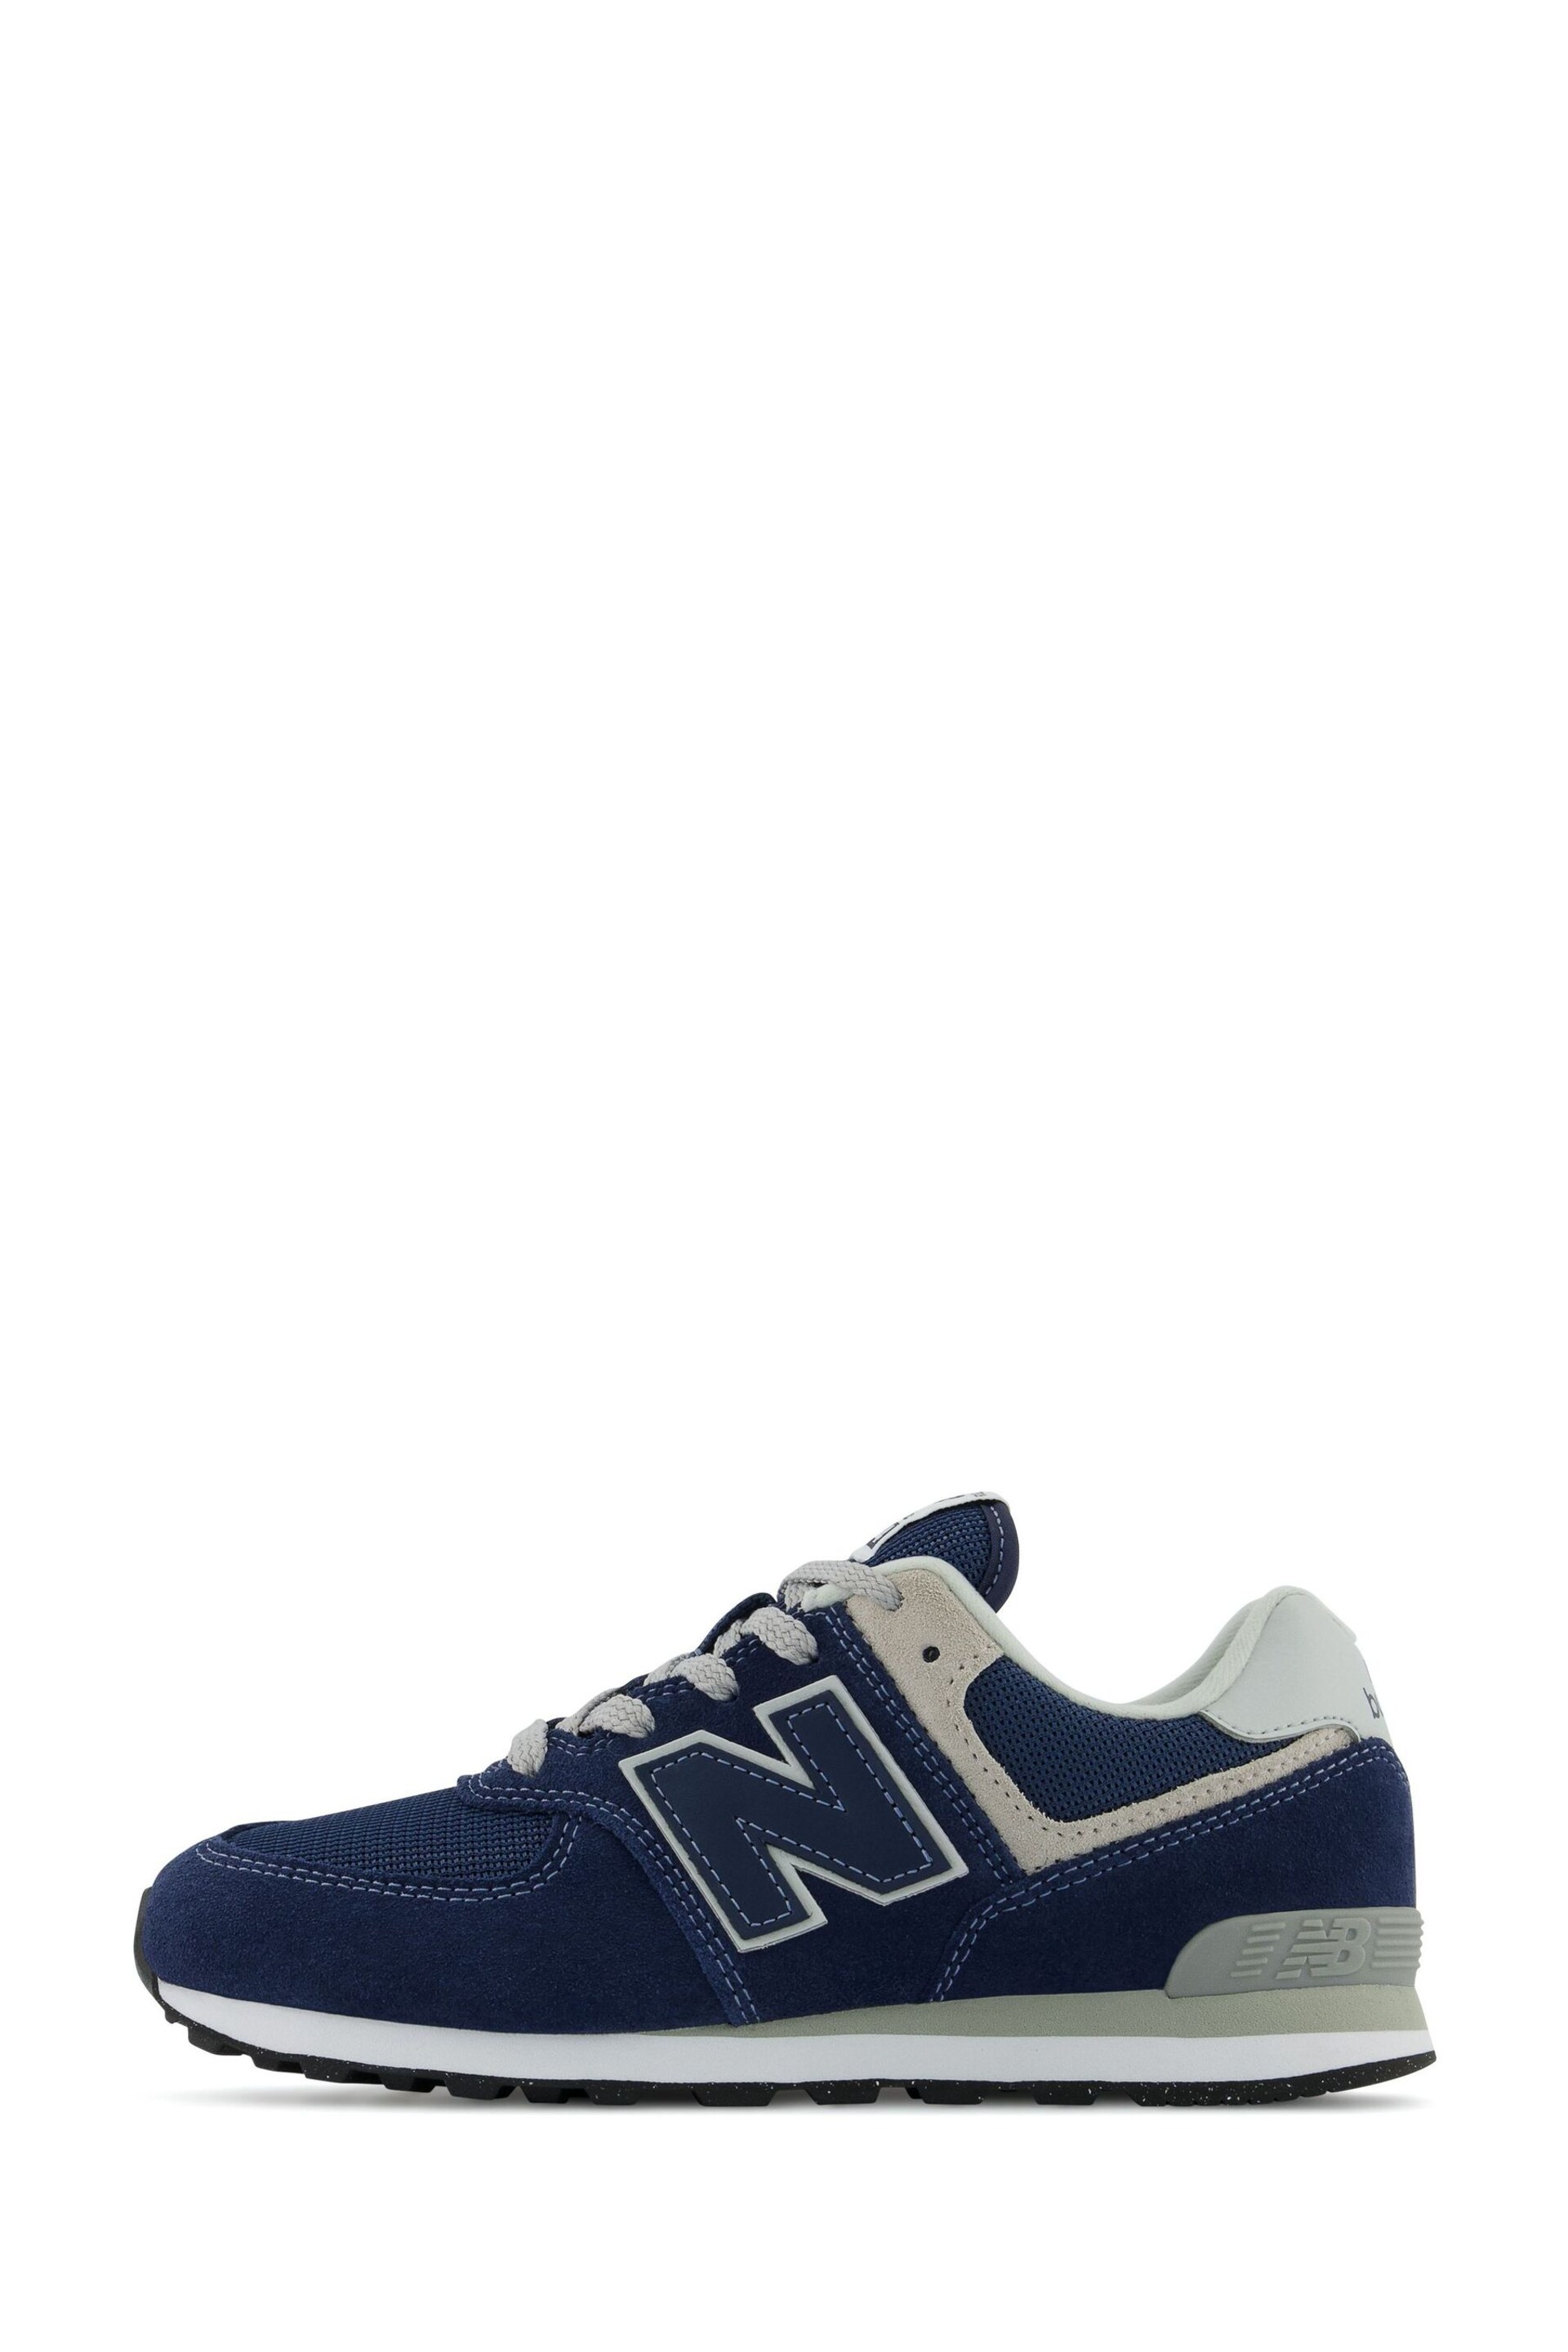 New Balance Blue Boys 574 Trainers - Image 4 of 7